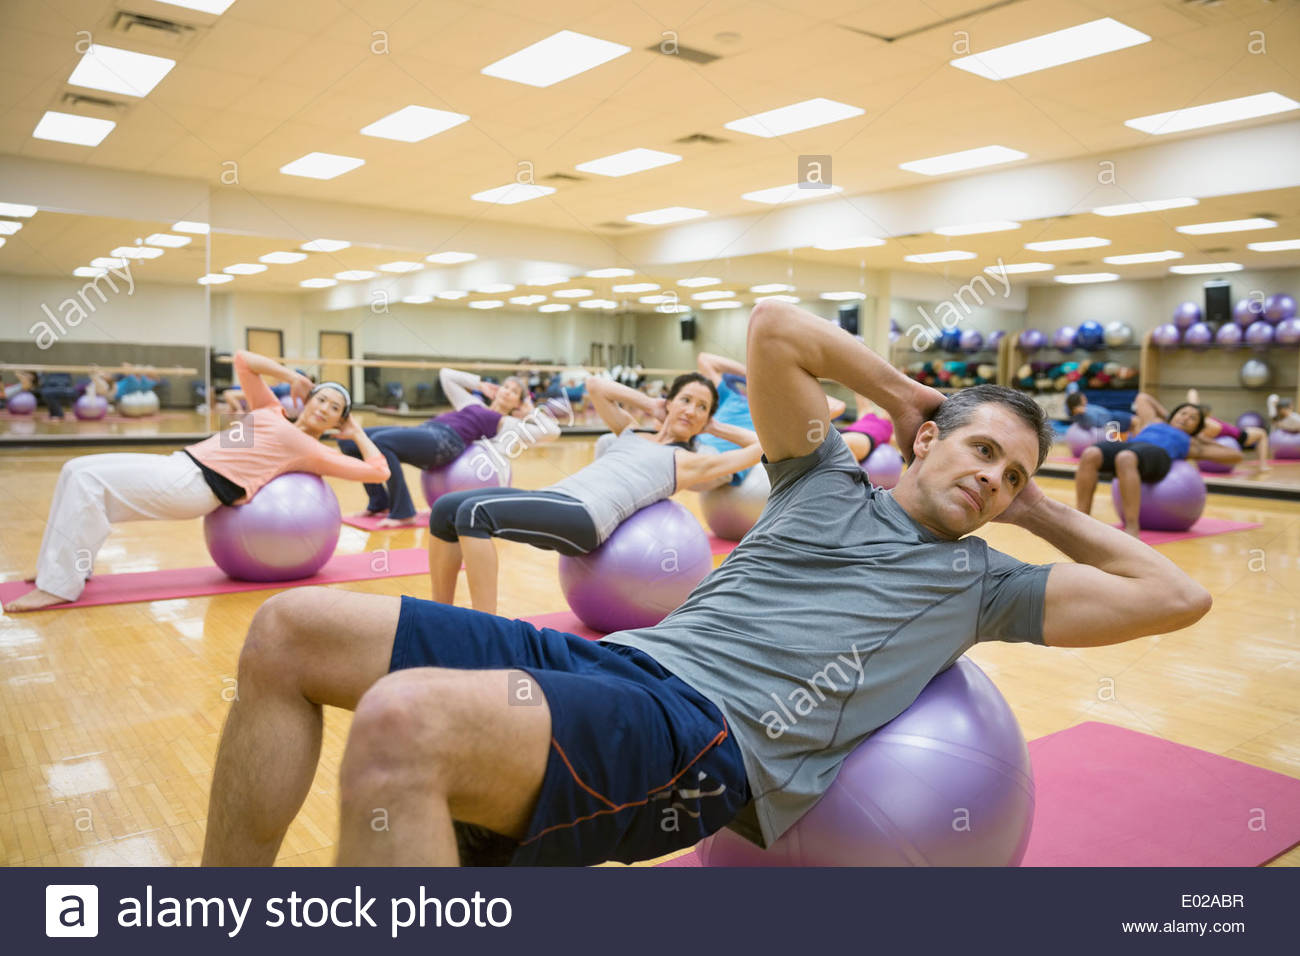 Group on fitness balls in exercise class Stock Photo